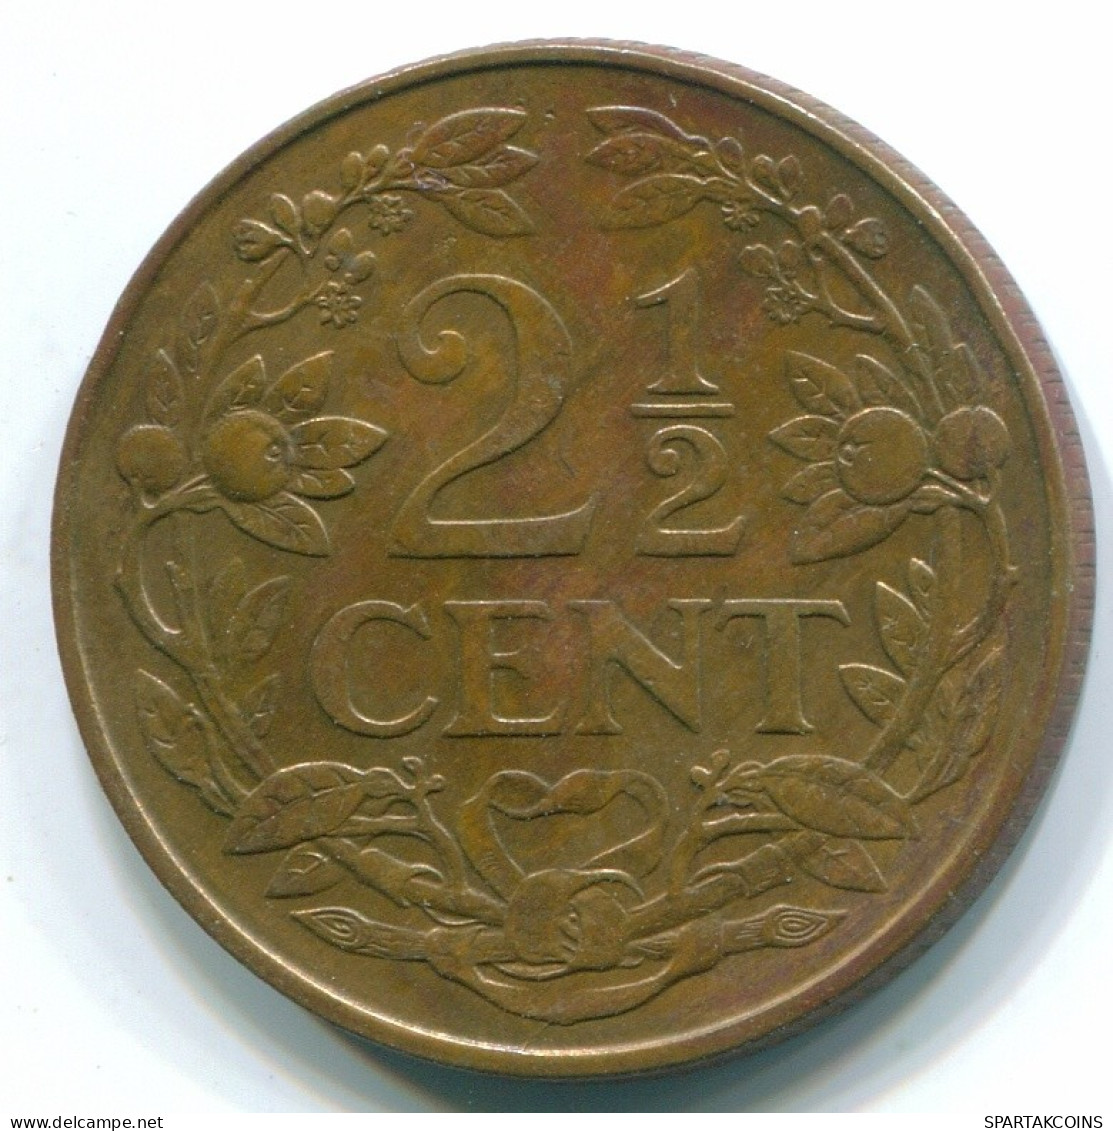 2 1/2 CENT 1965 CURACAO Netherlands Bronze Colonial Coin #S10206.U.A - Curacao